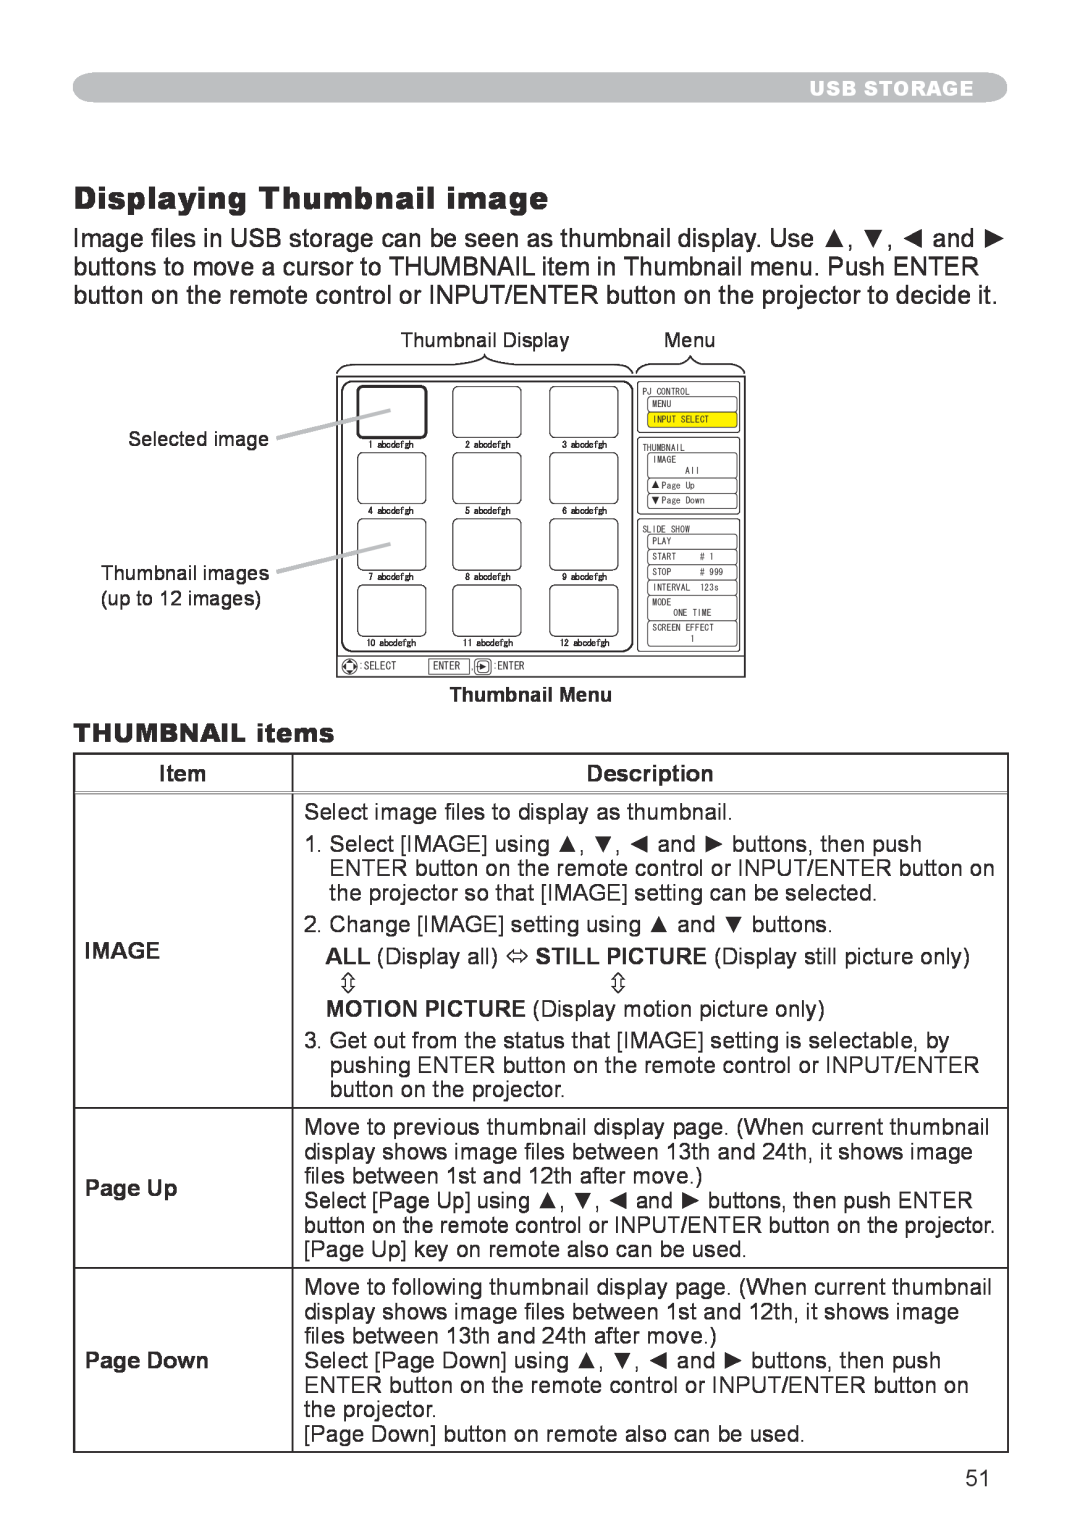 Apple CPX1, CPX5 user manual Displaying Thumbnail image, THUMBNAIL items, Description, Image, Page Up, Page Down 